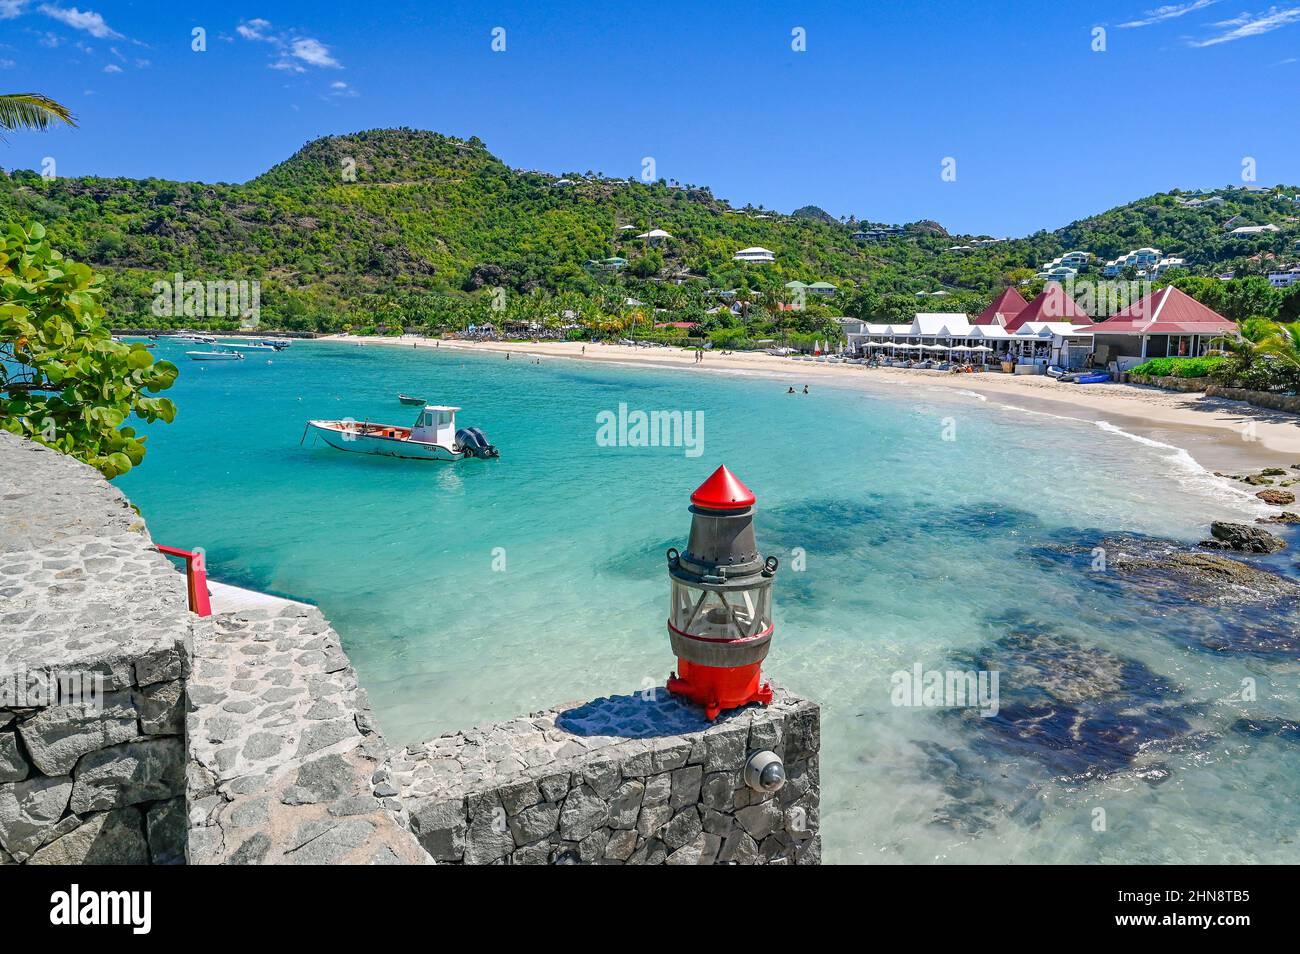 St barth saint barthelemy hi-res stock photography and images - Alamy